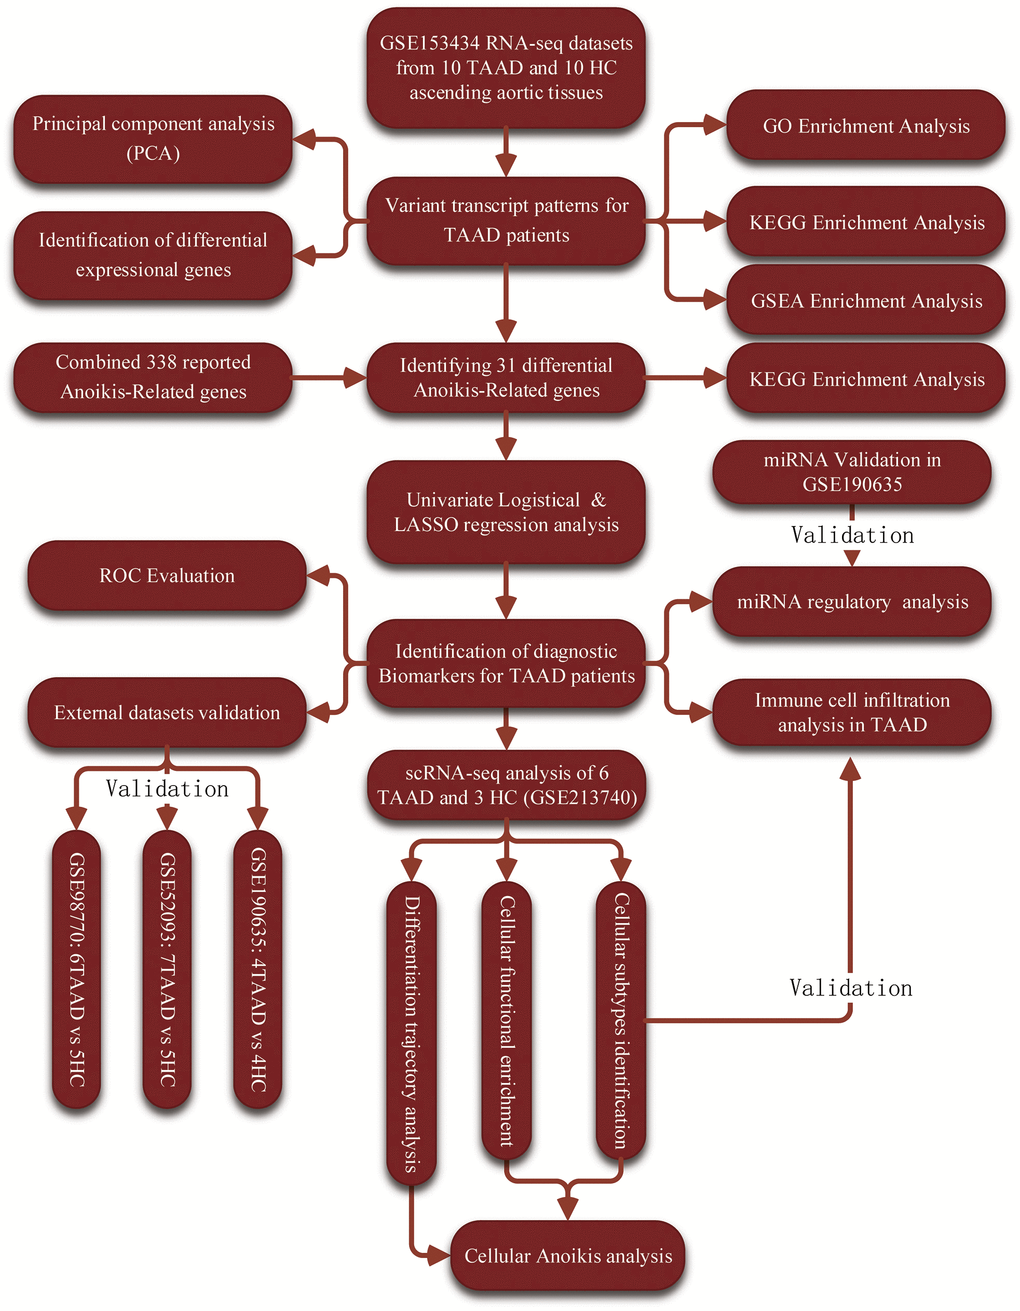 The workflow chart of this study.